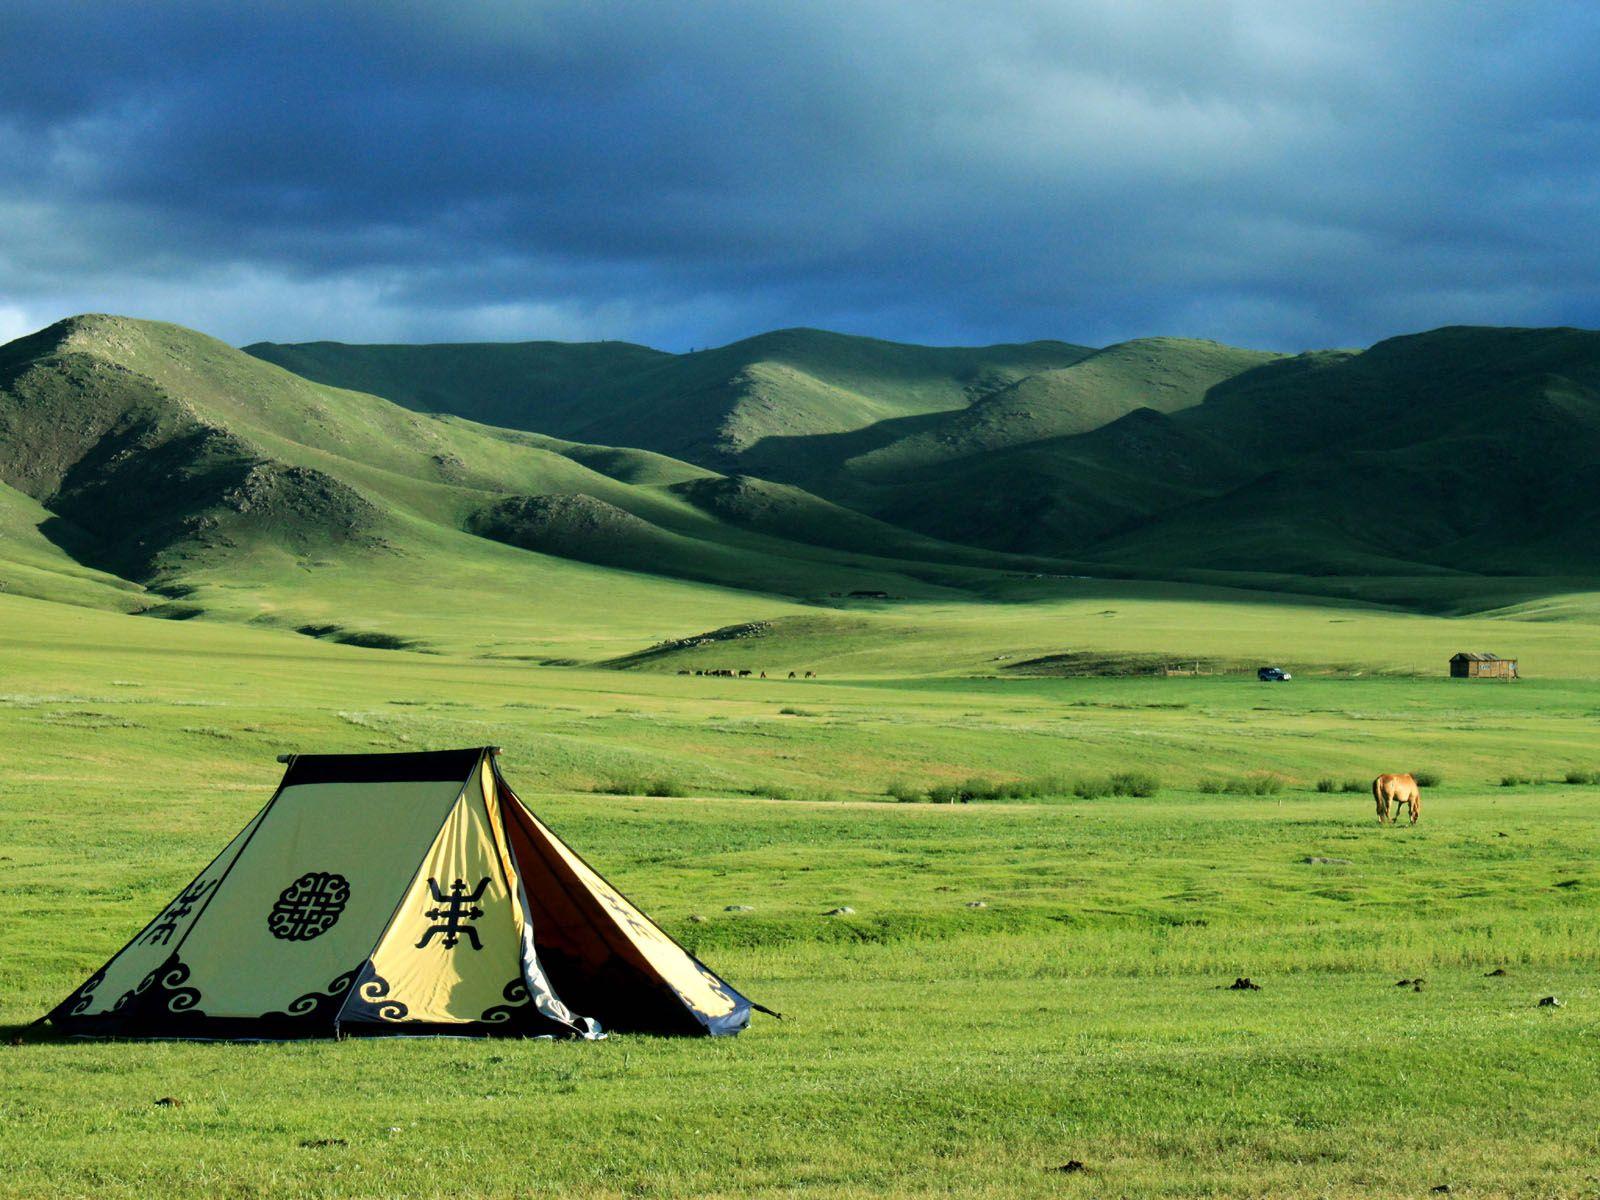 Mongolia's Grasslands And Tents Travel photo and wallpaper